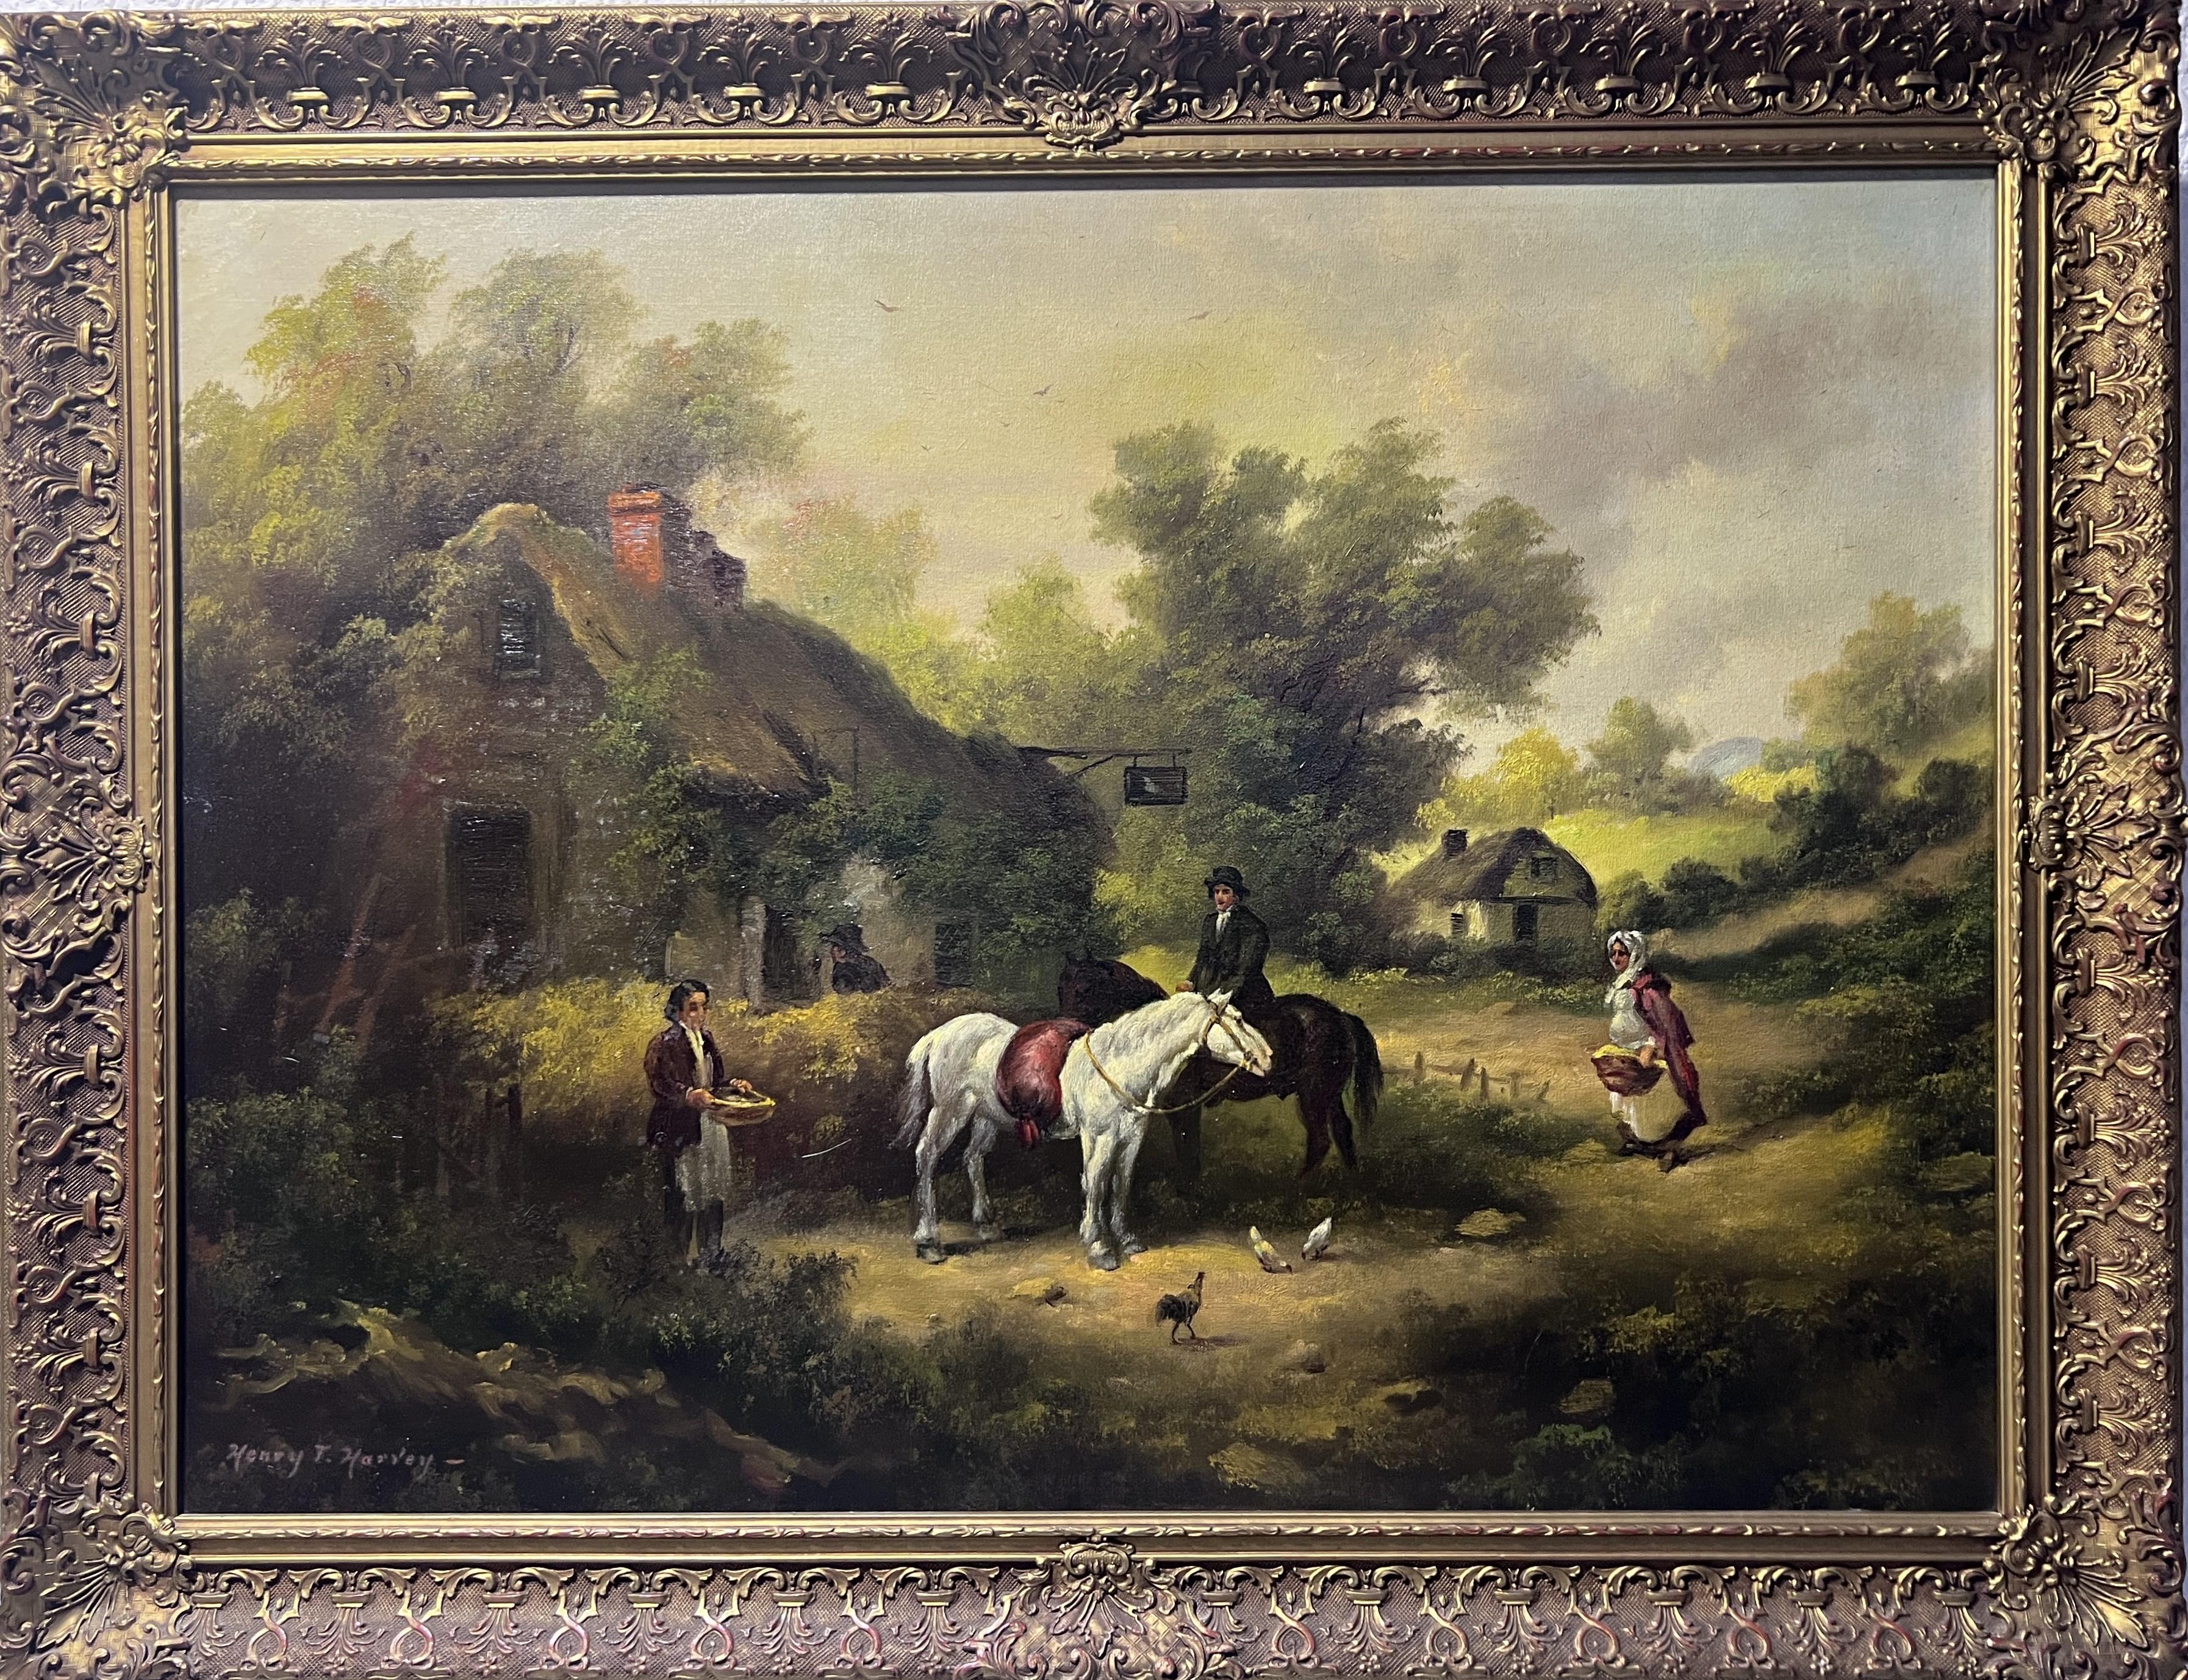 This is a Large antique original oil painting on canvas depicting a bucolic rural scene, lively with characters and activities. In the foreground, a young man on horseback converses with a woman holding a basket, suggesting a moment of daily